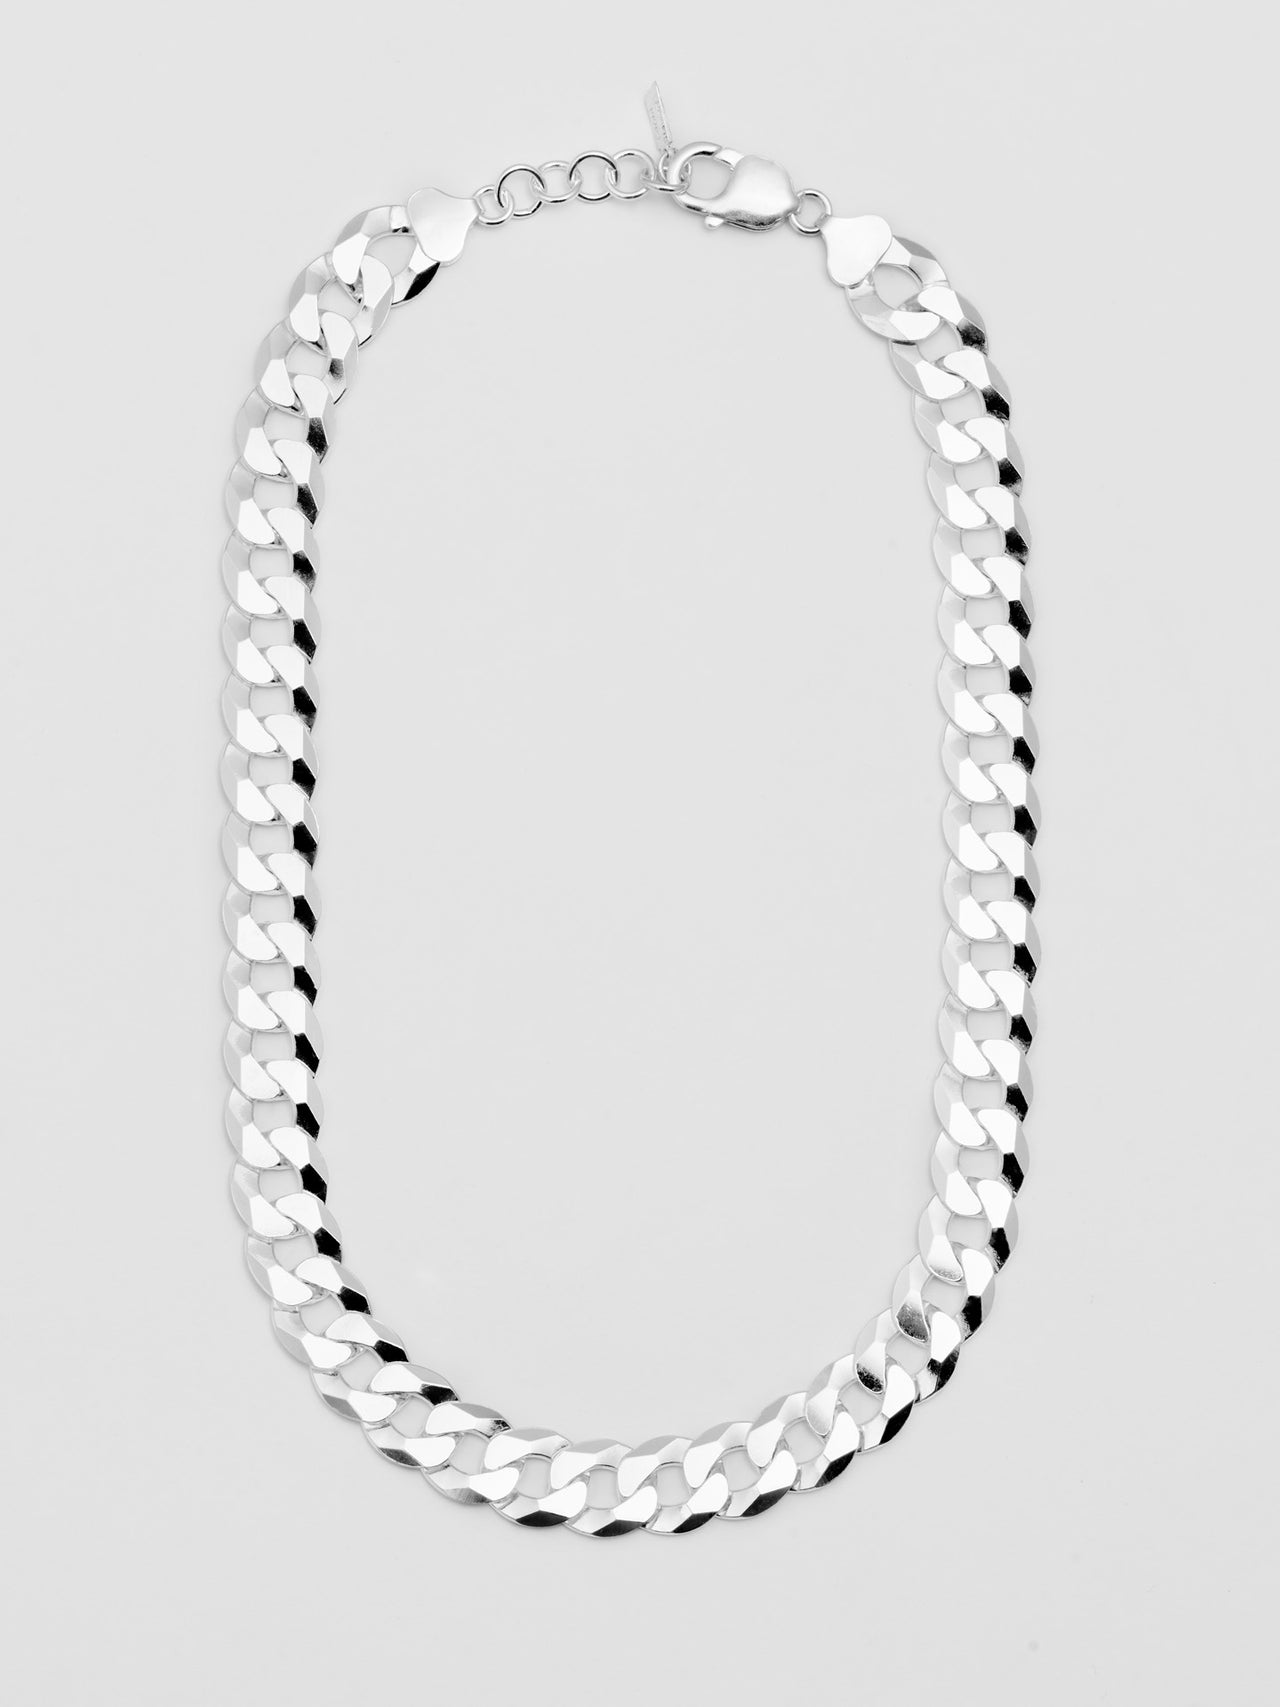 XXL Curb Chain Necklace: Sterling Silver XL Diamond Cut Curb Chain Necklace